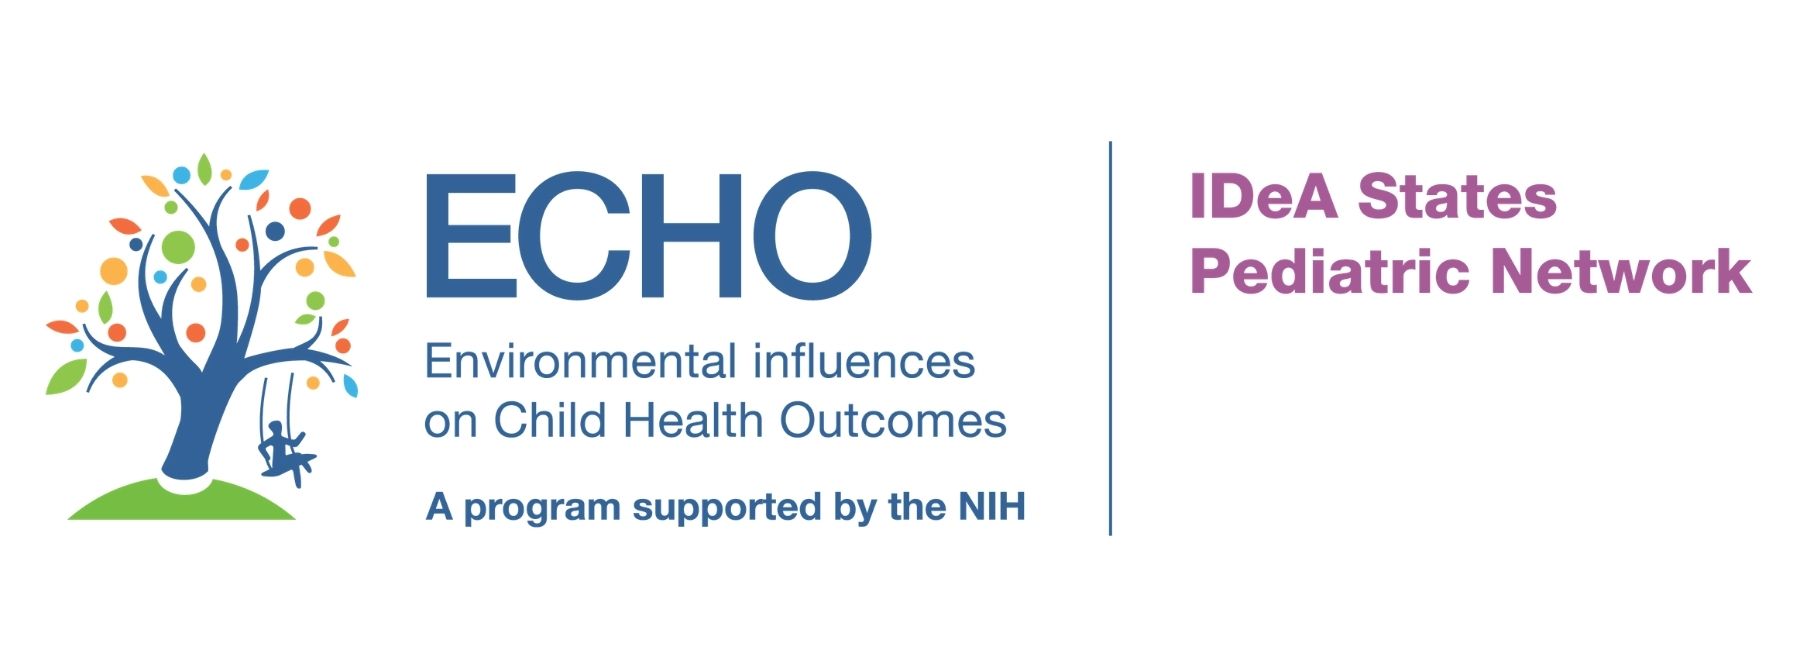 ECHO – Environmental influences on Child Health Oucomes: Aprogram supported by the NIH. IDeA States Pediatric Network.